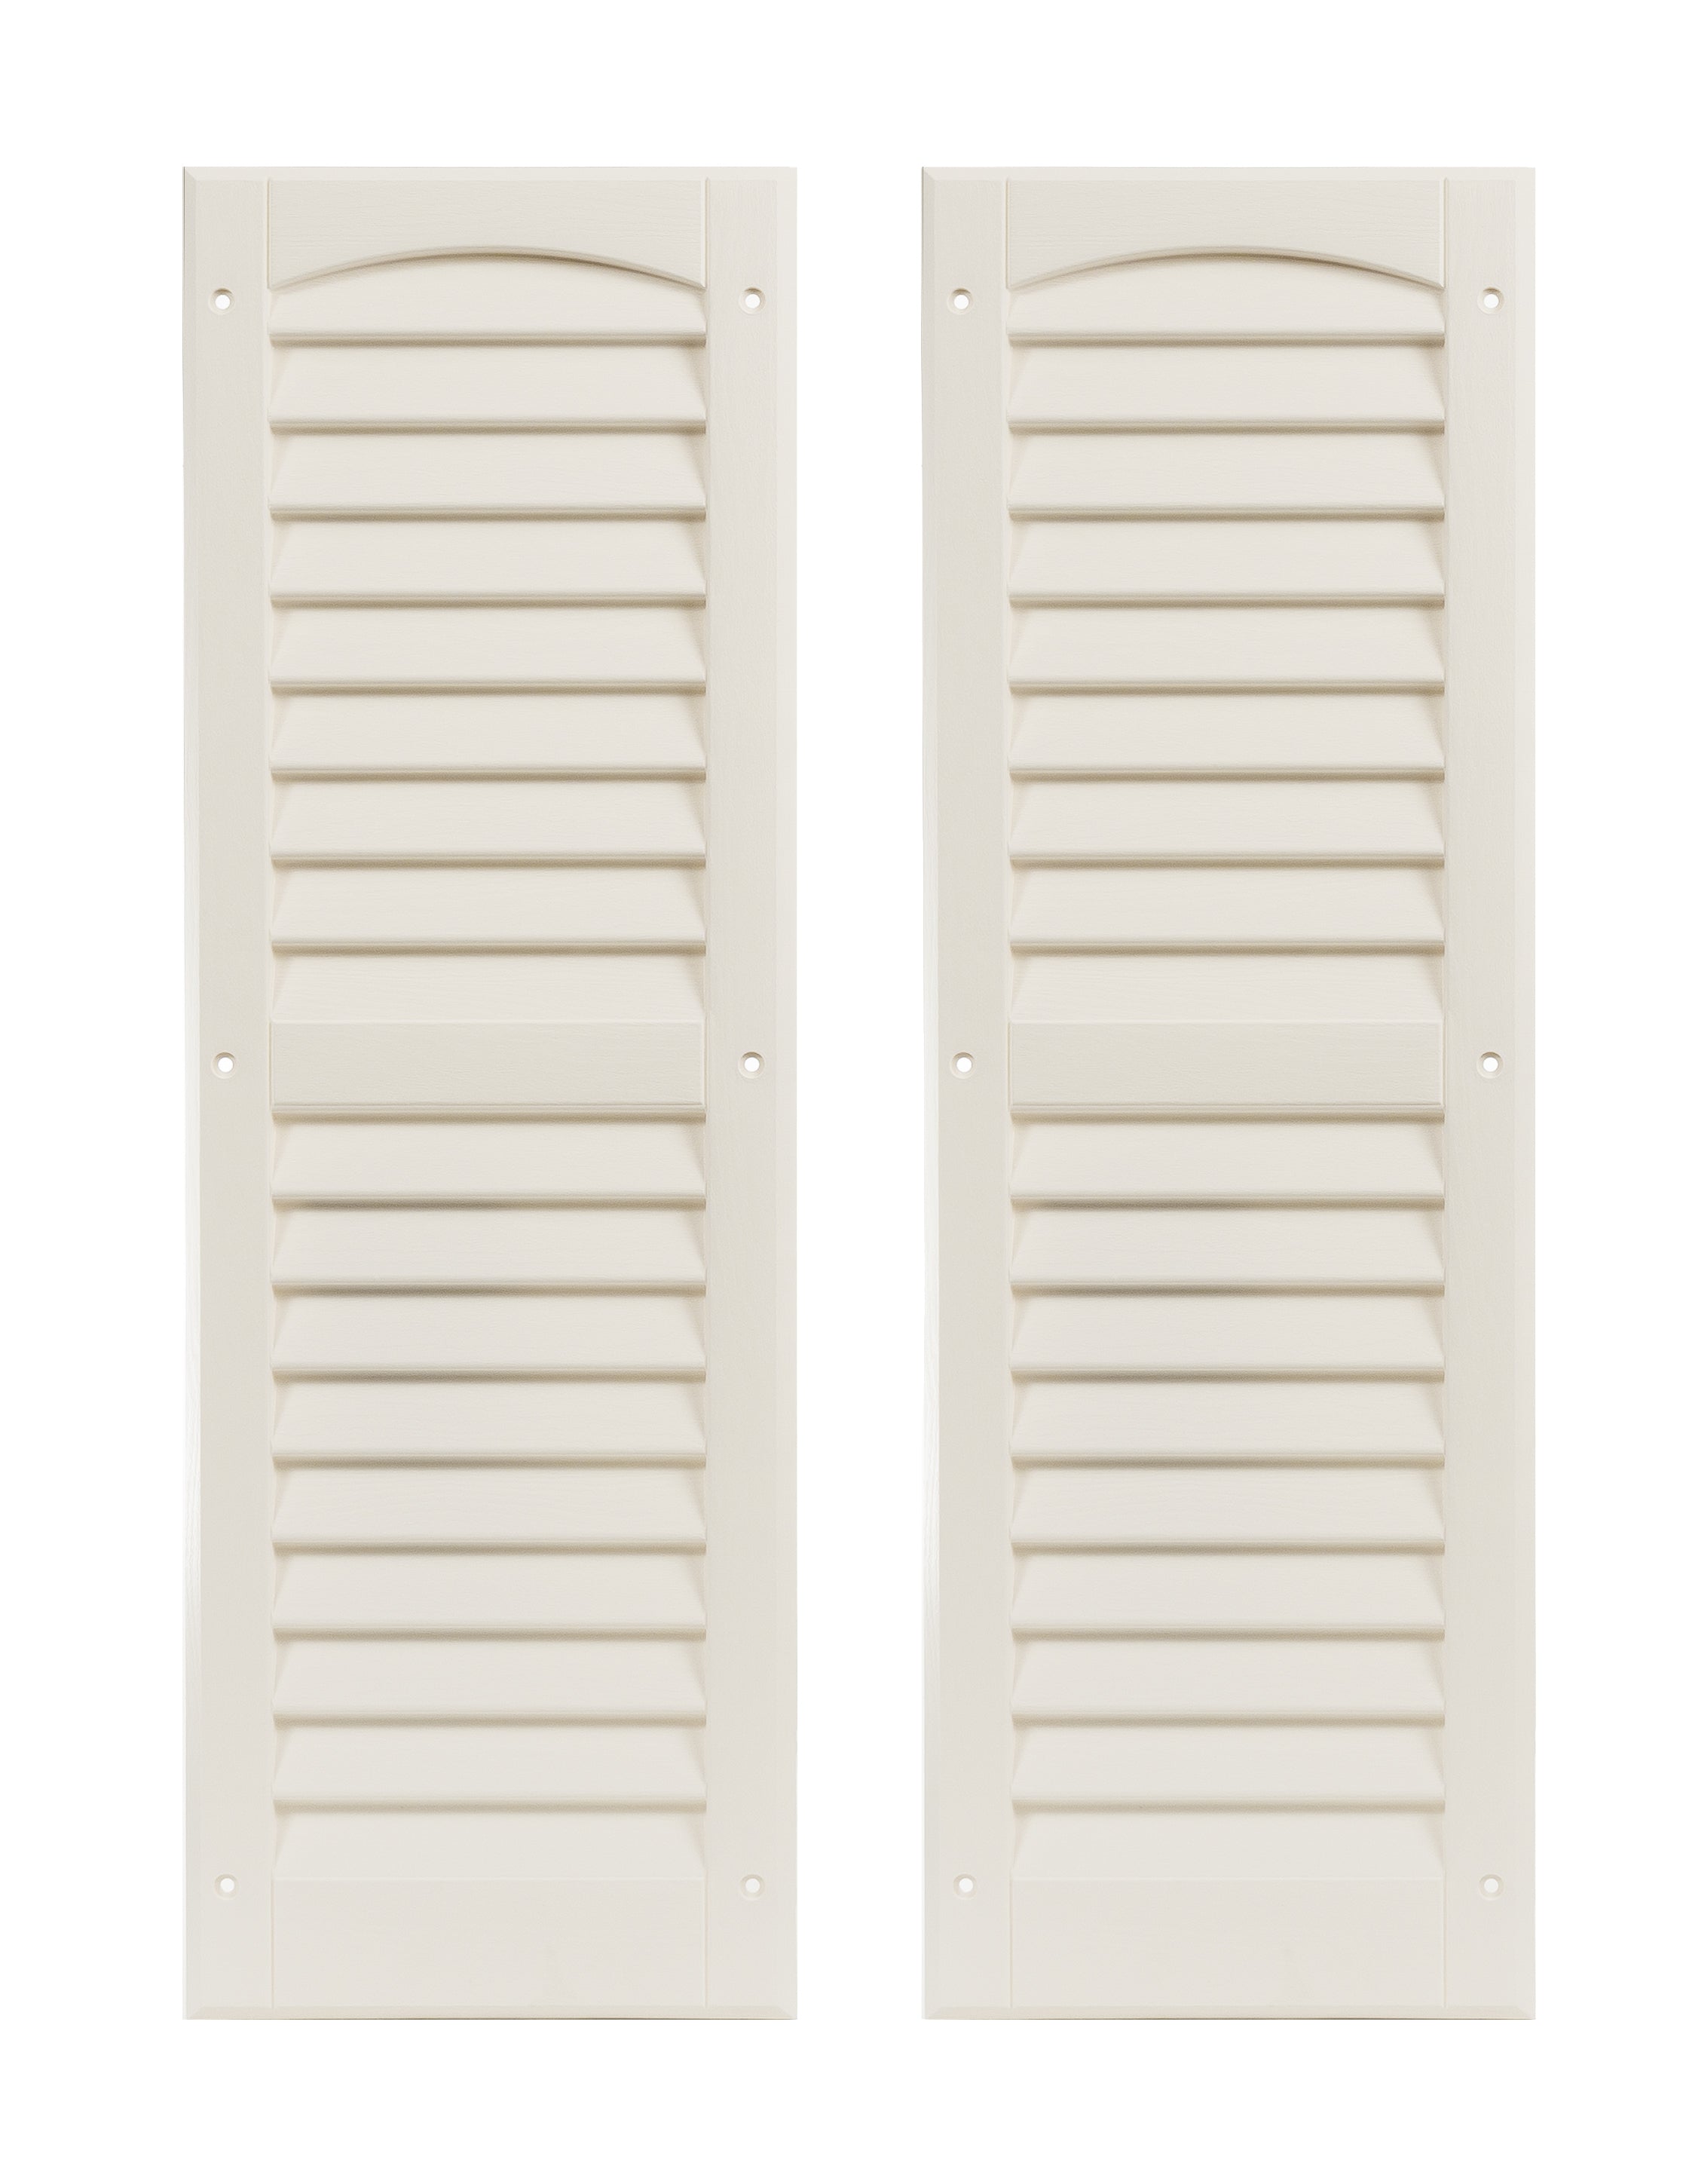 Pair of 9" W x 27" H Louvered Paintable Shutters for Sheds, Playhouses, and MORE 